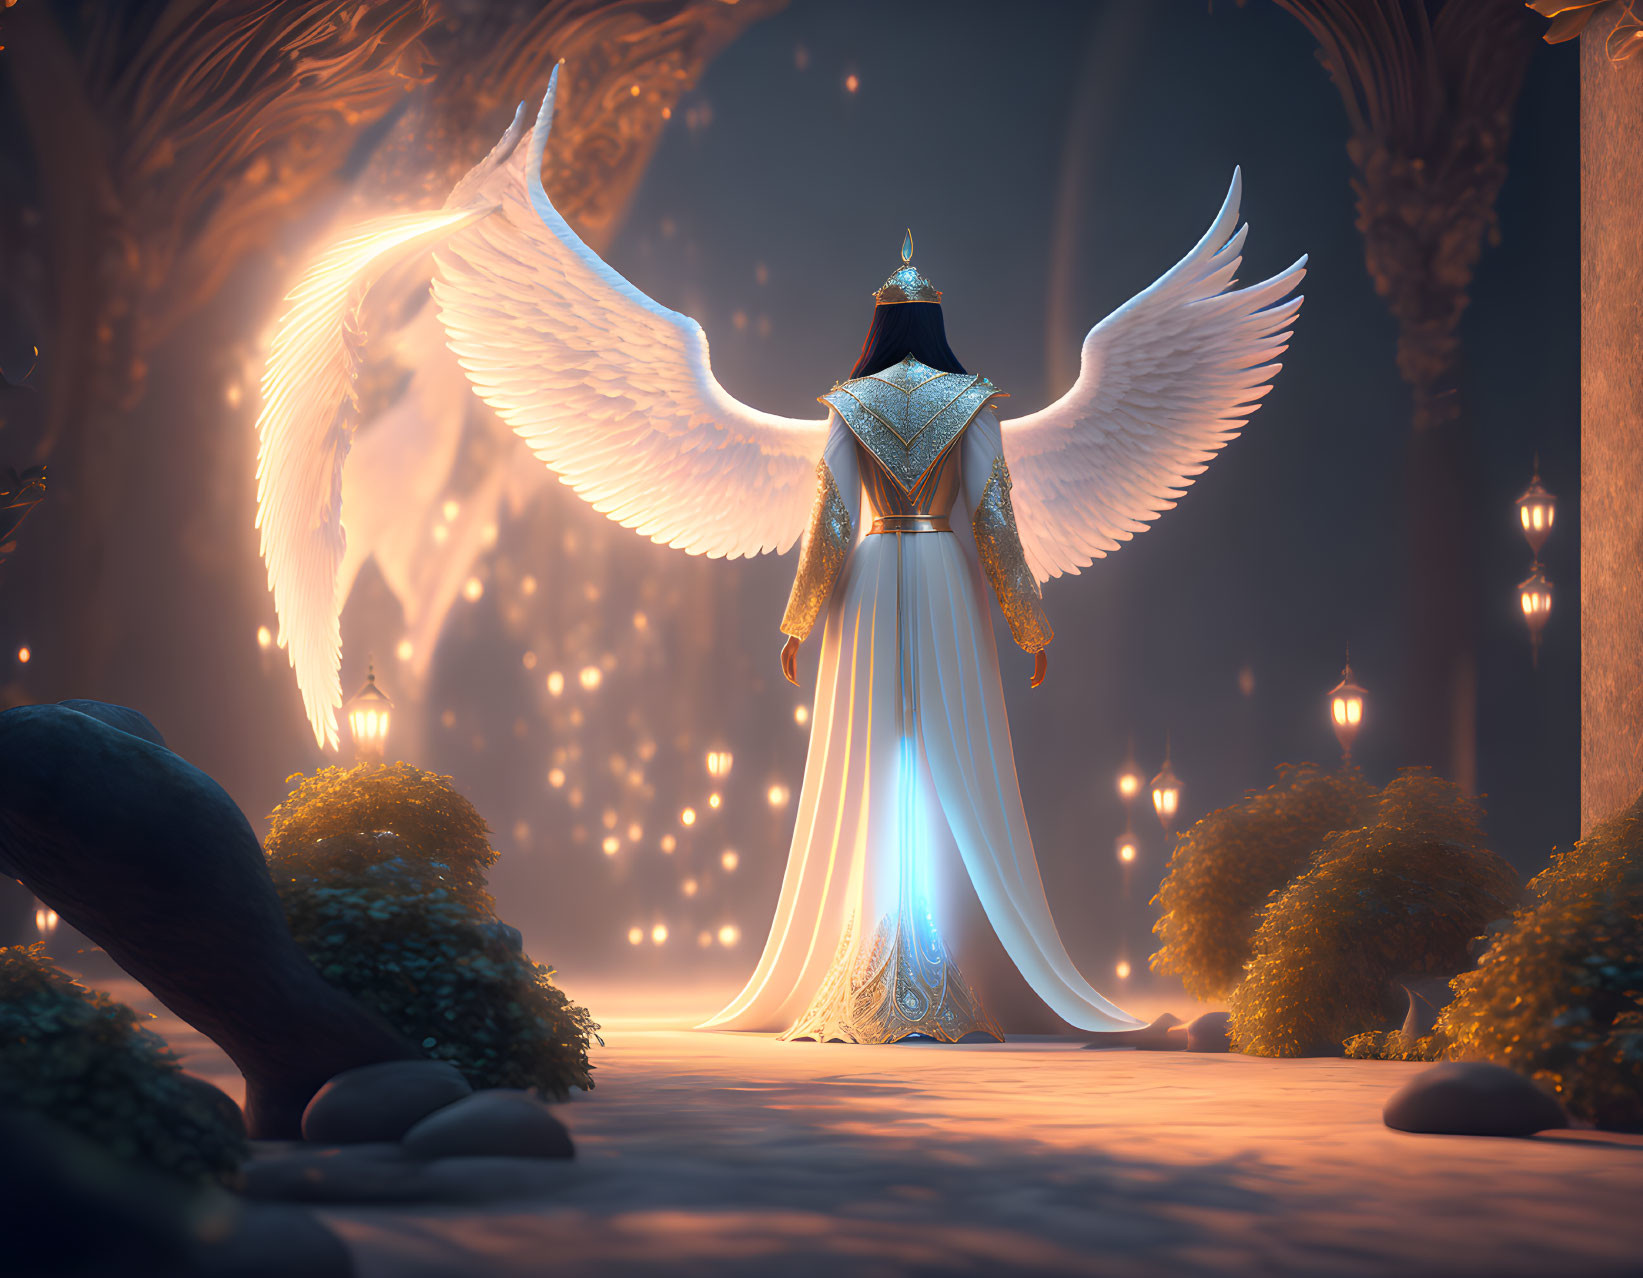 Majestic winged figure in ornate armor in mystical, candle-lit setting